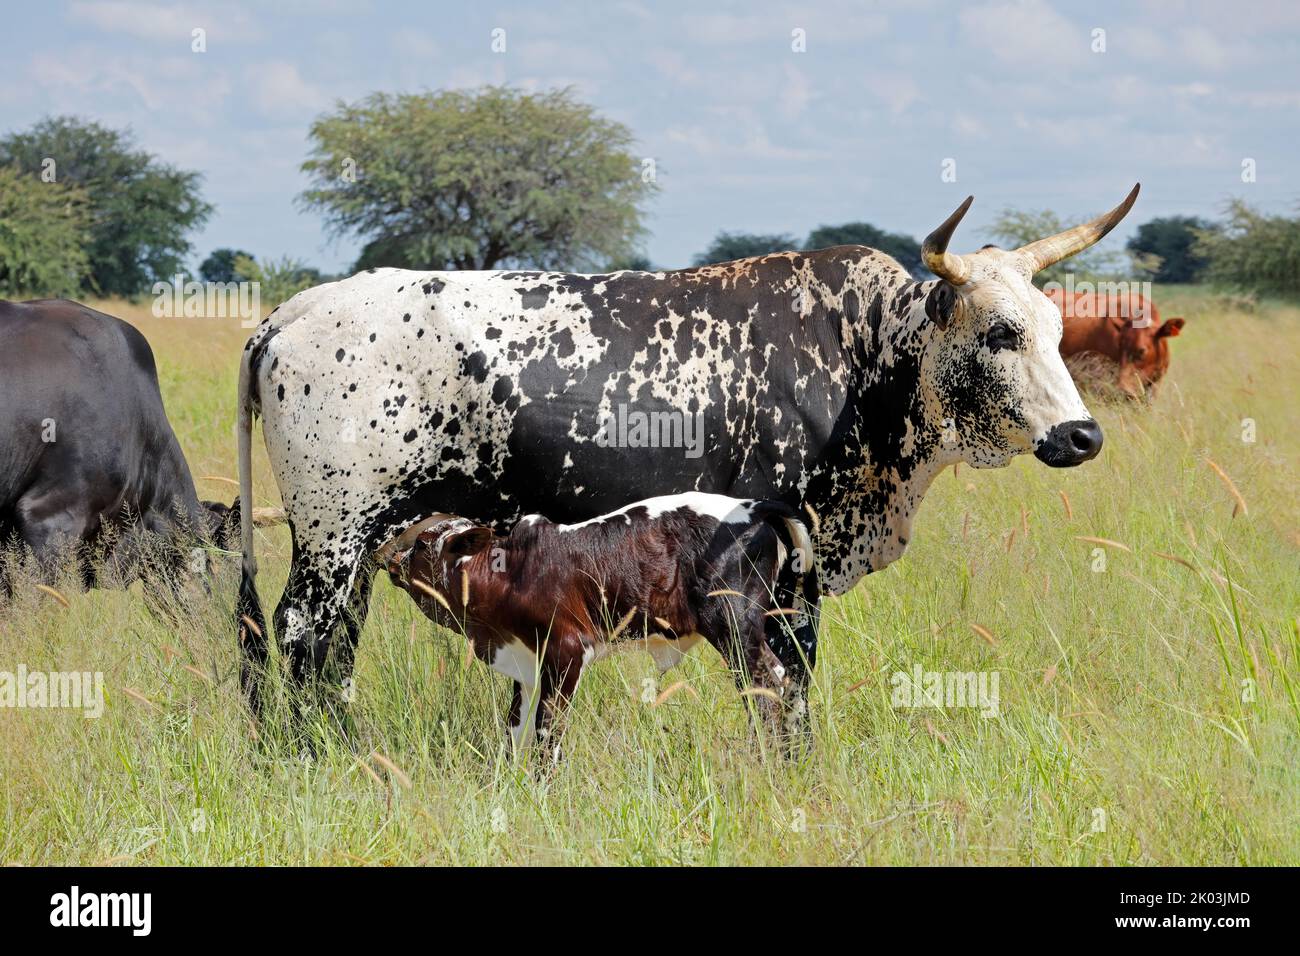 Nguni cow - indigenous cattle breed of South Africa - with suckling calf Stock Photo